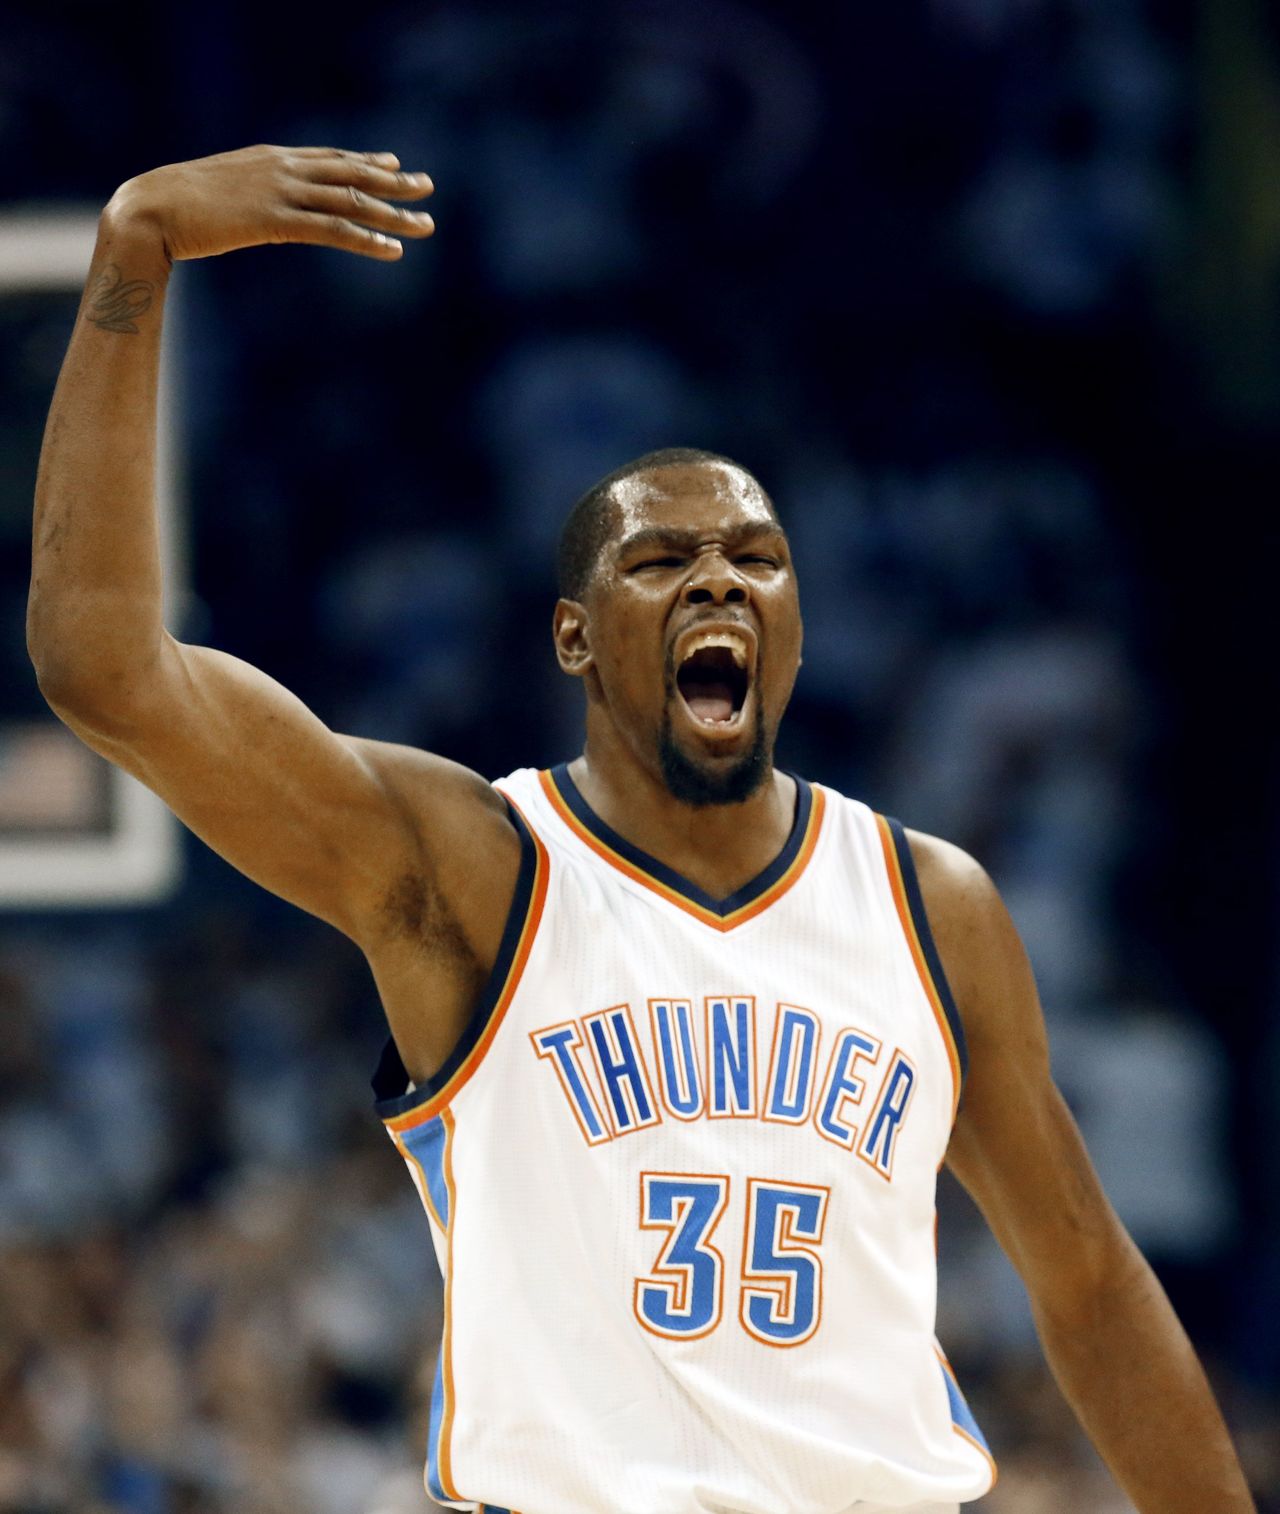 The Thunder’s Kevin Durant scored 33 points as Oklahoma City defeated the Warriors 133-105 in Game 3 of their NBA Western Conference finals series.